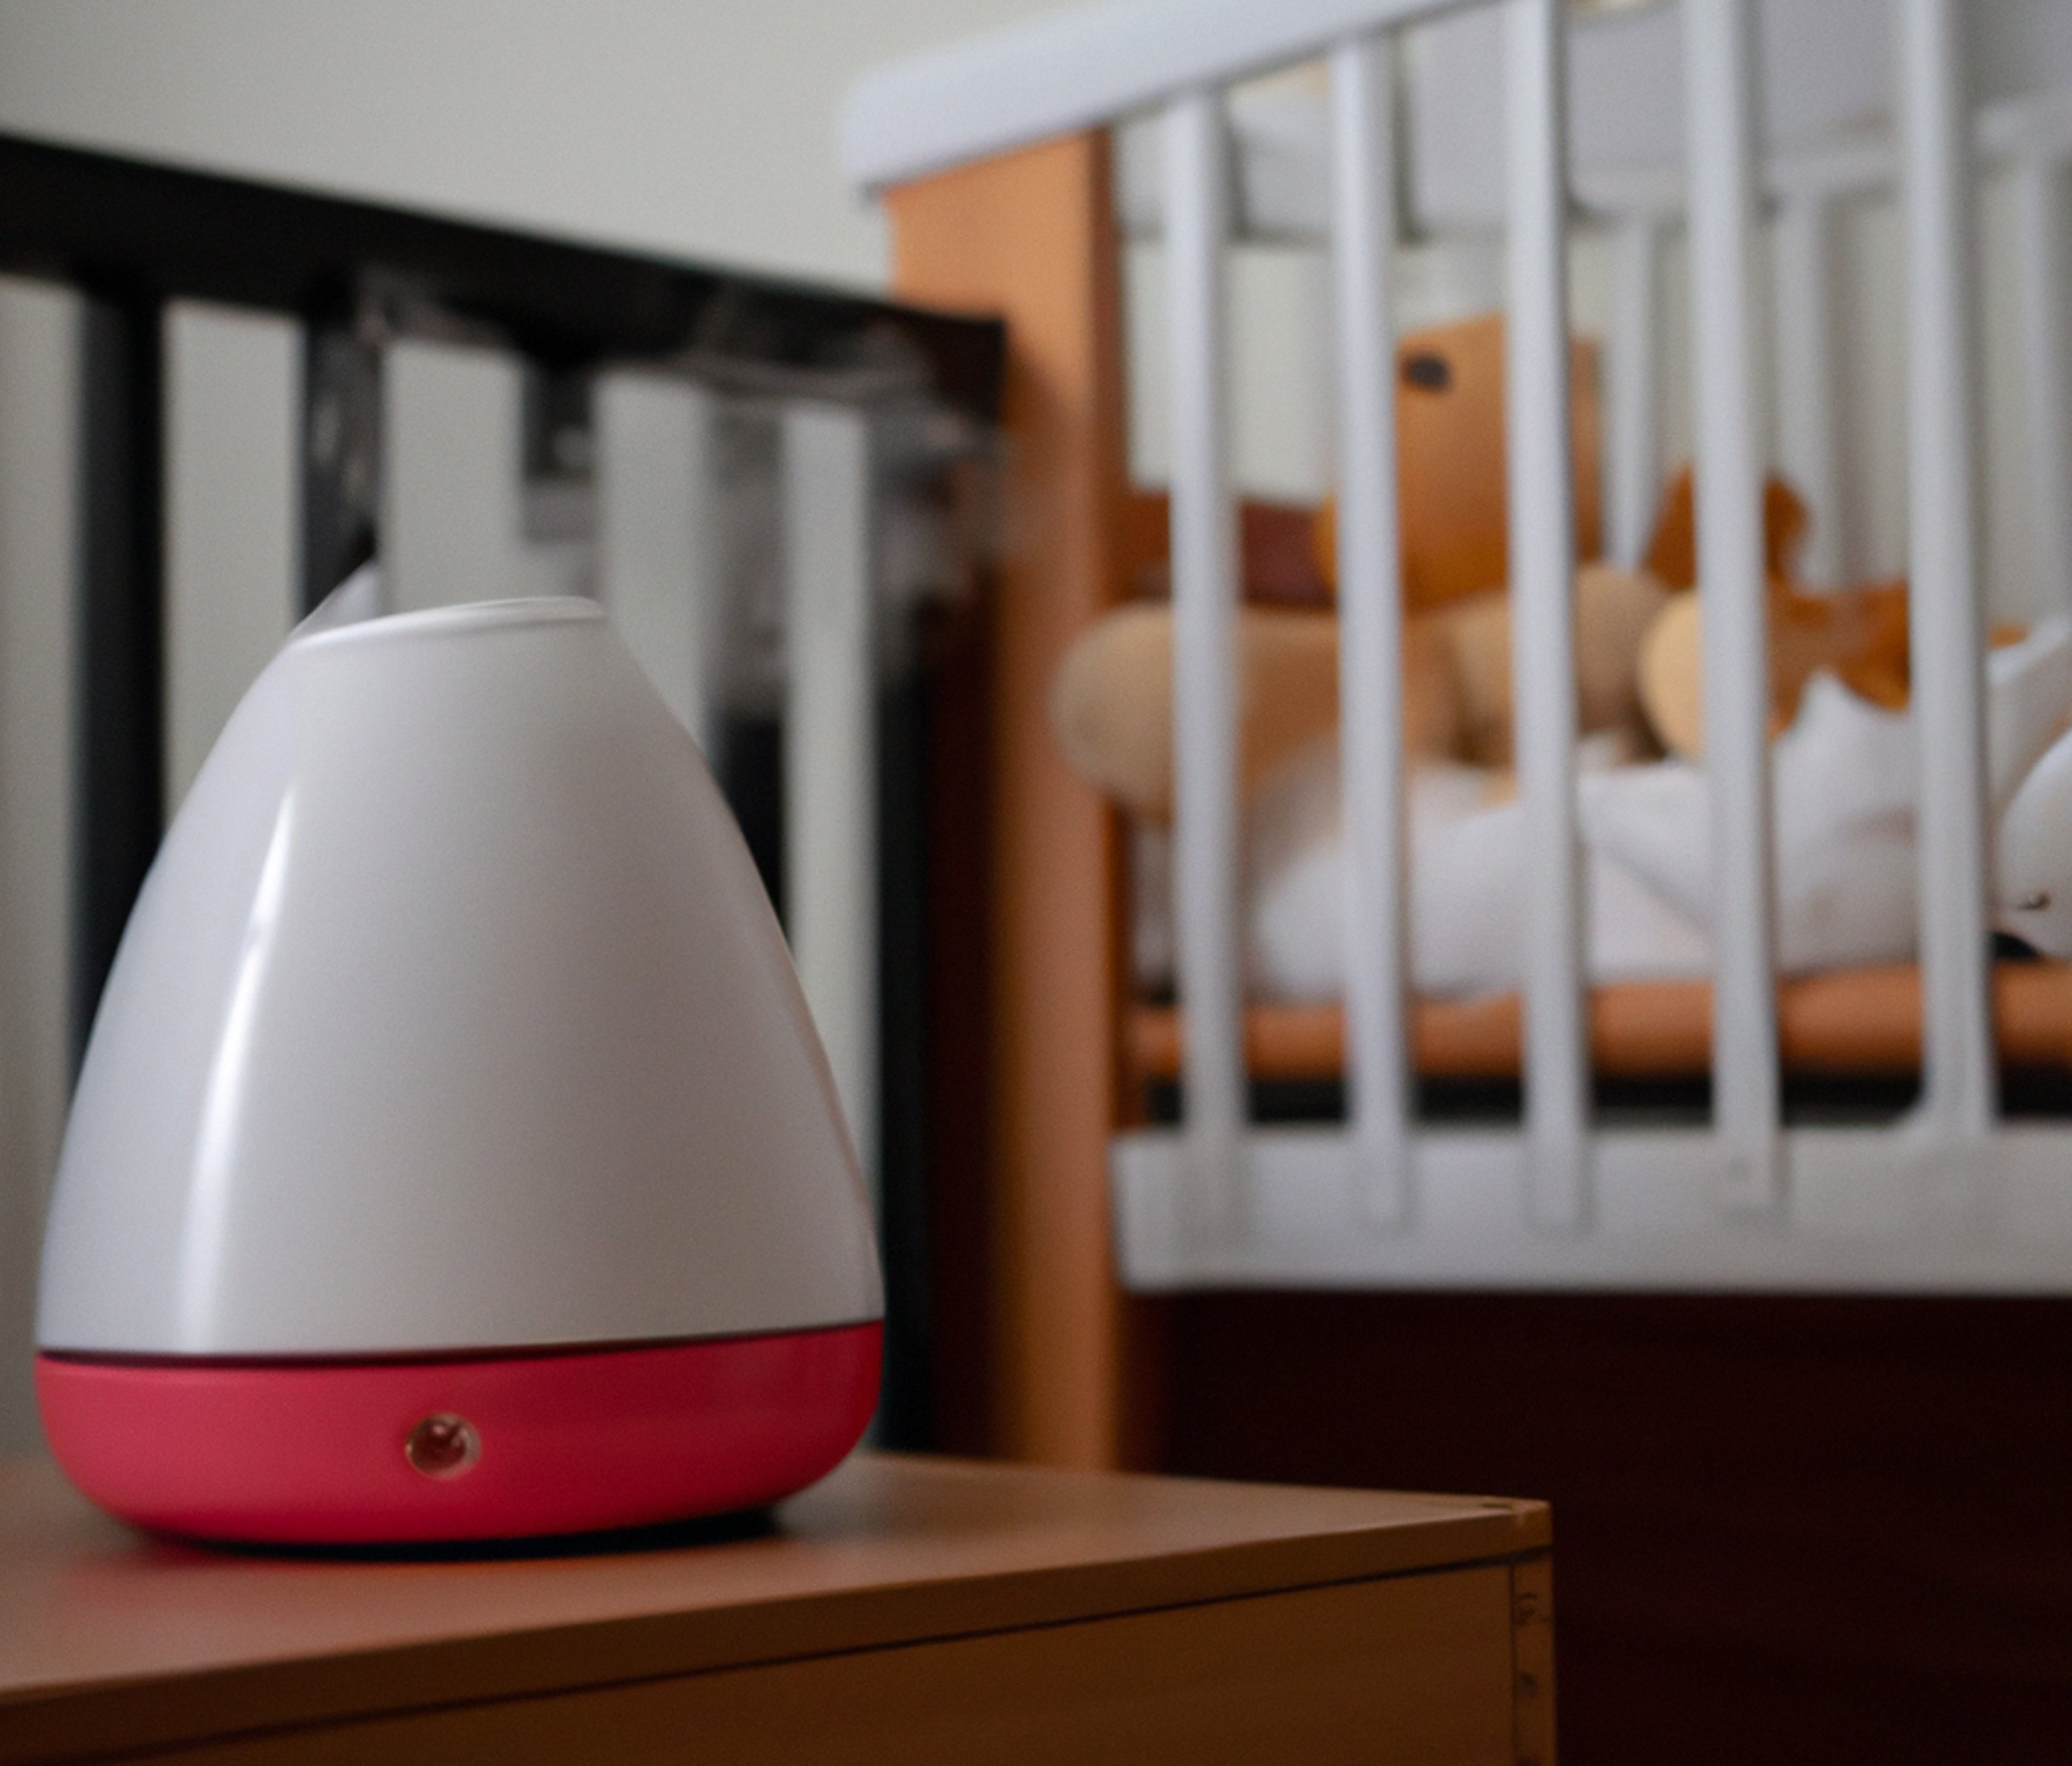 Humidifier Use for Your Baby: When, Why, and How